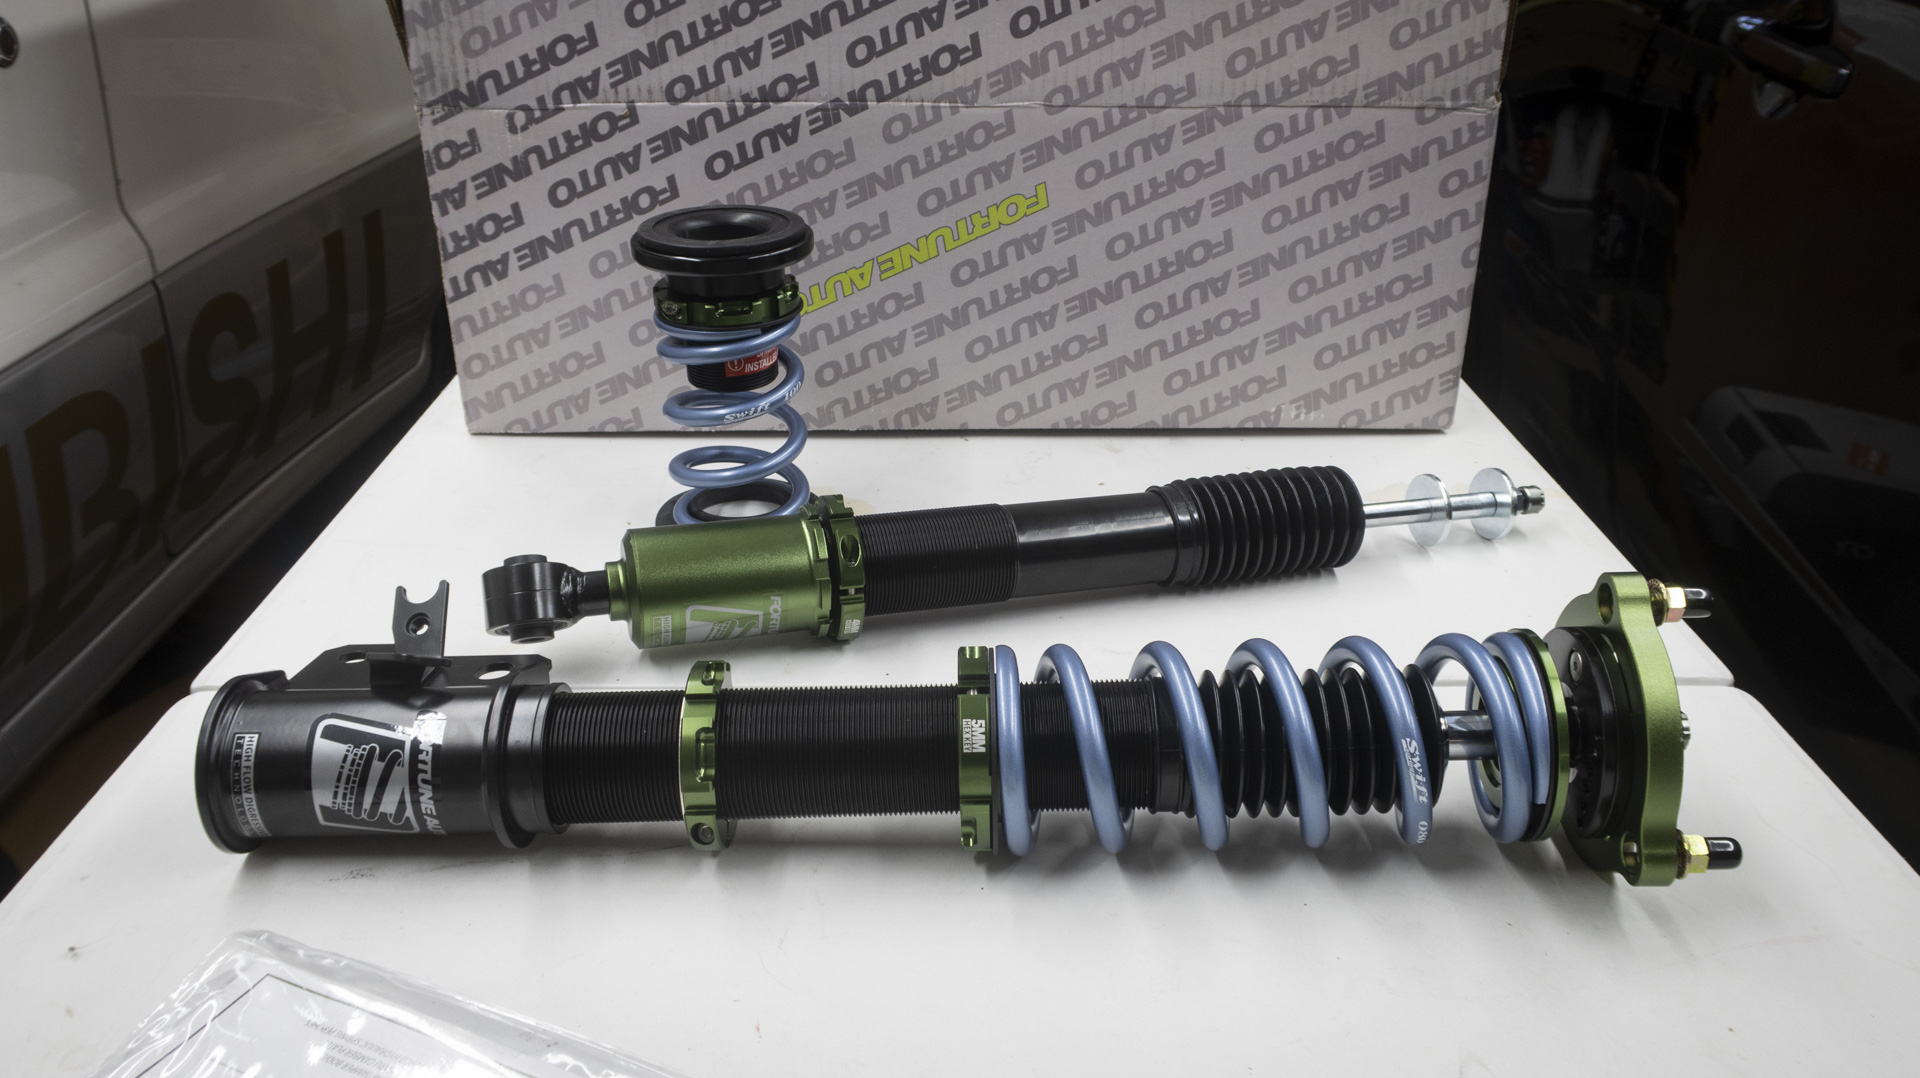 If you do buy coilovers, make sure to take a lot of pictures when they come right out of the box ... they'll never be that clean again! <em>Andrew P. Collins</em>